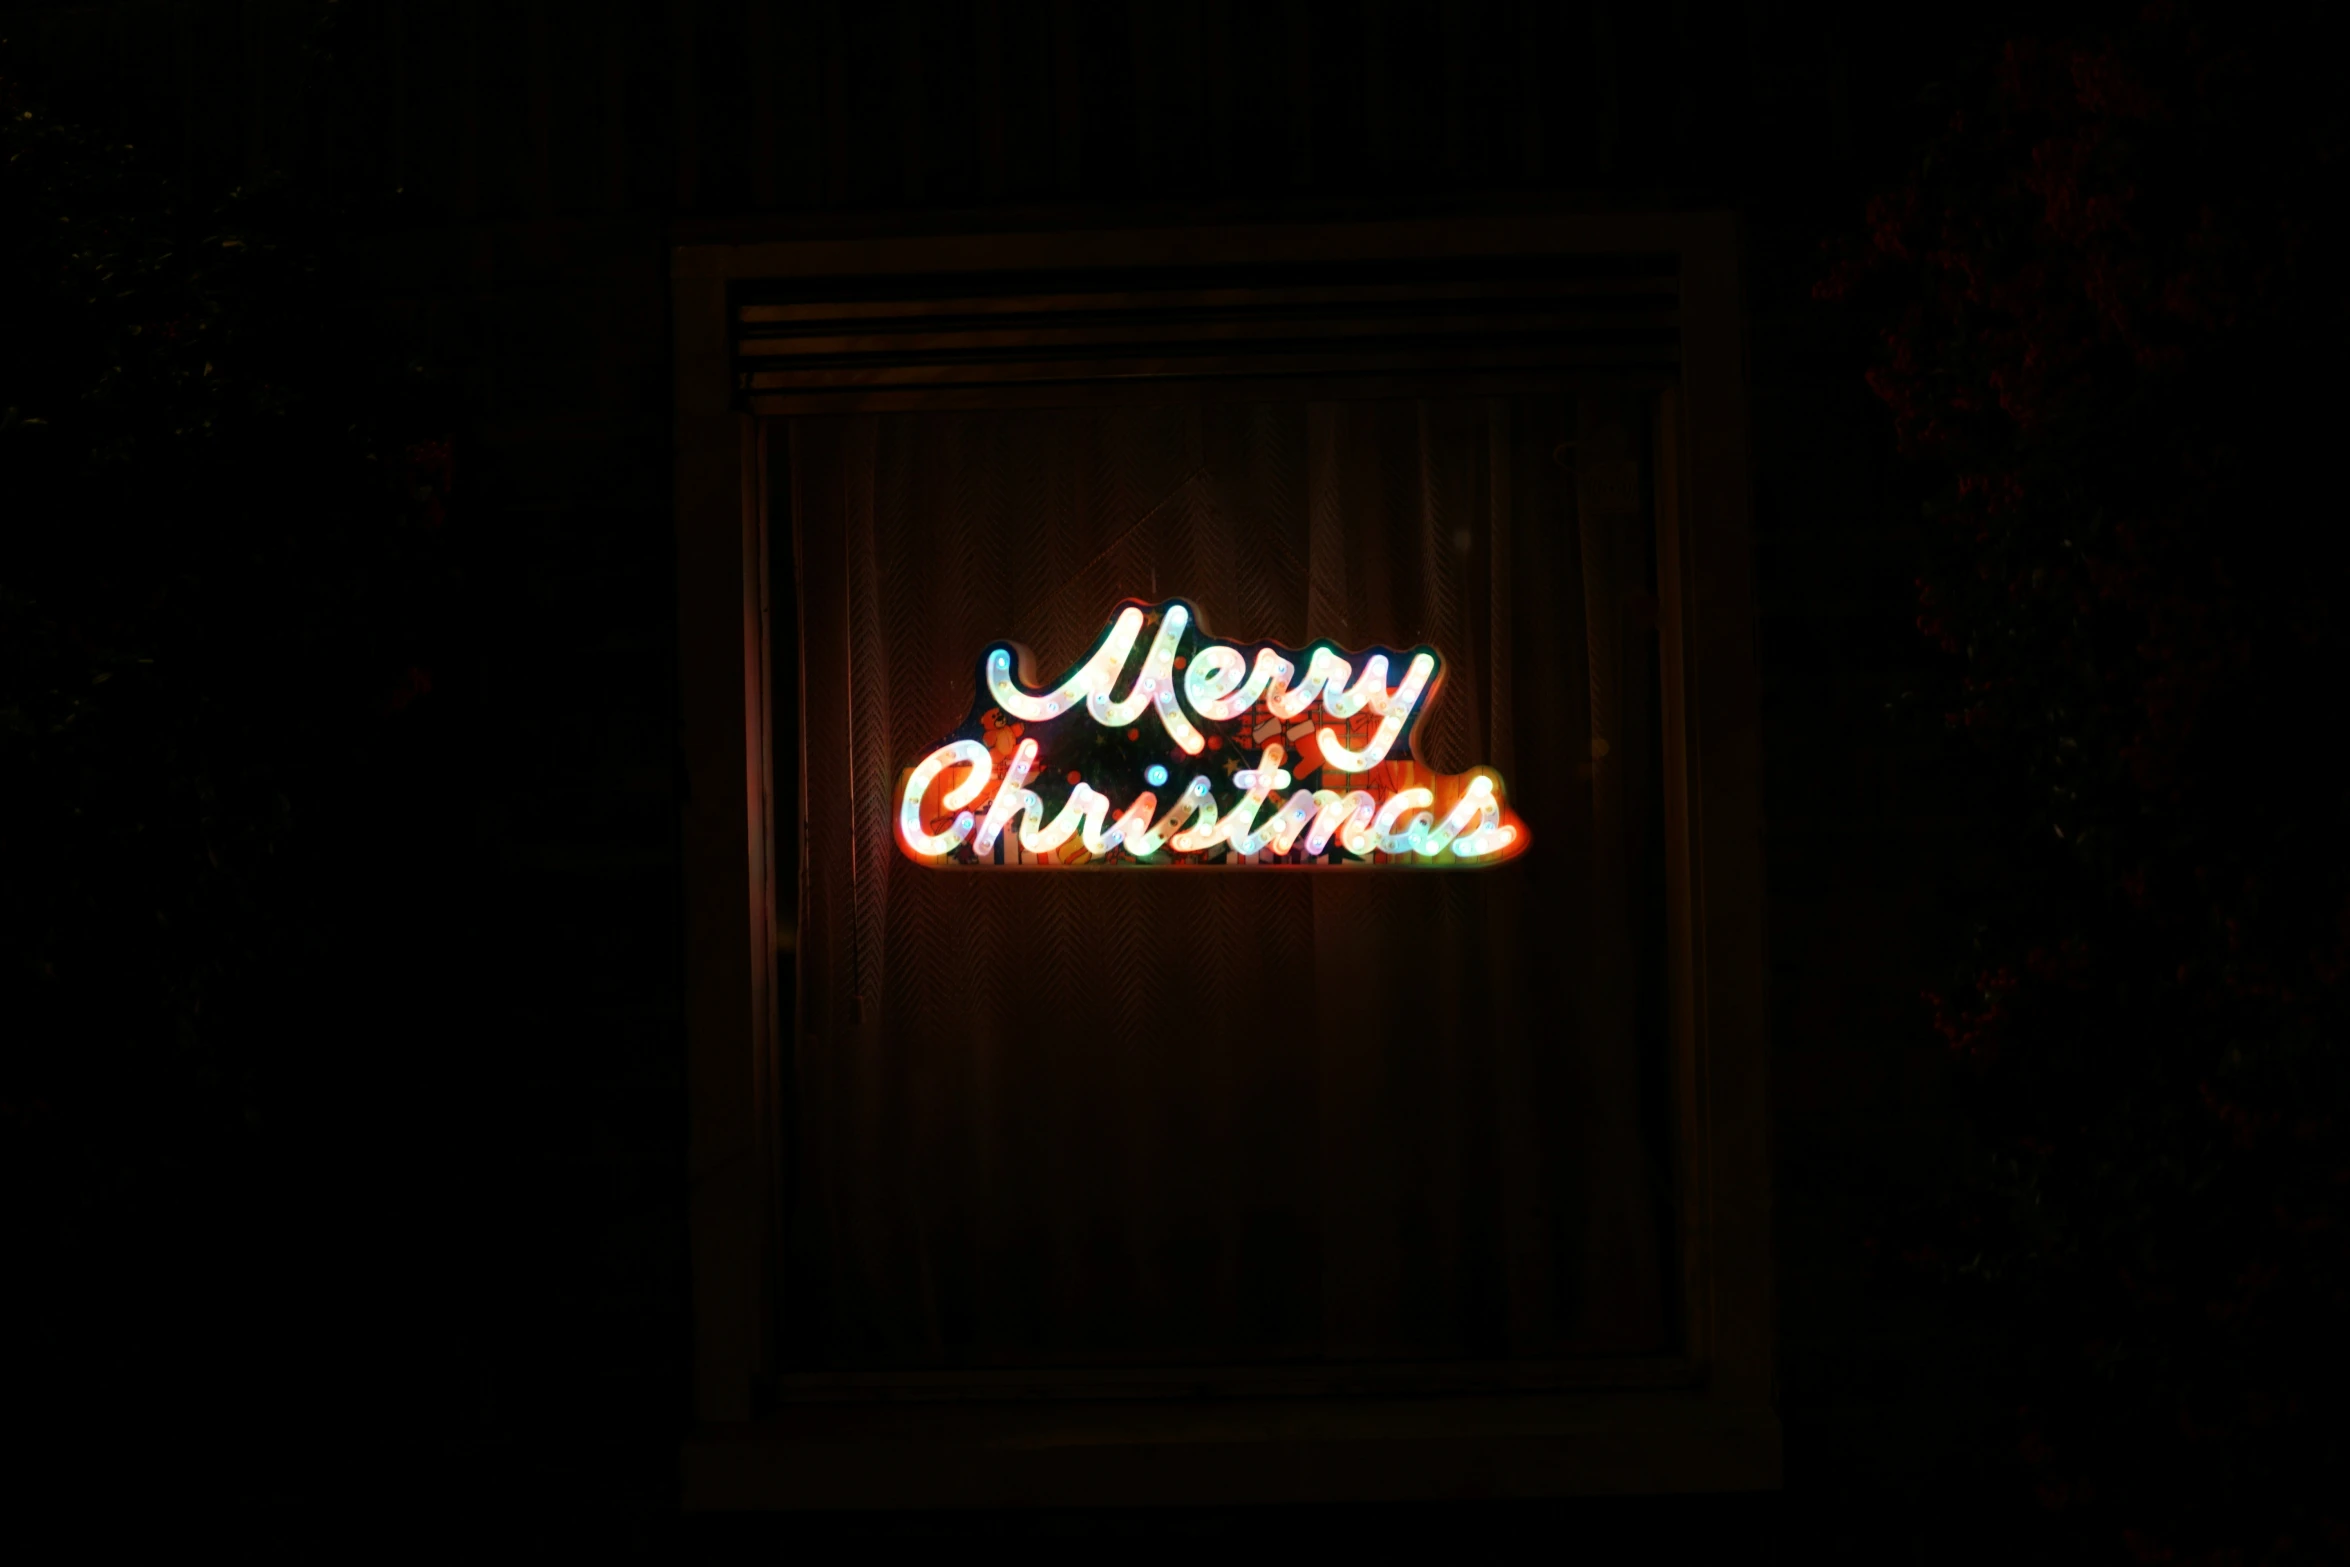 a christmas message projected on a screen in the dark